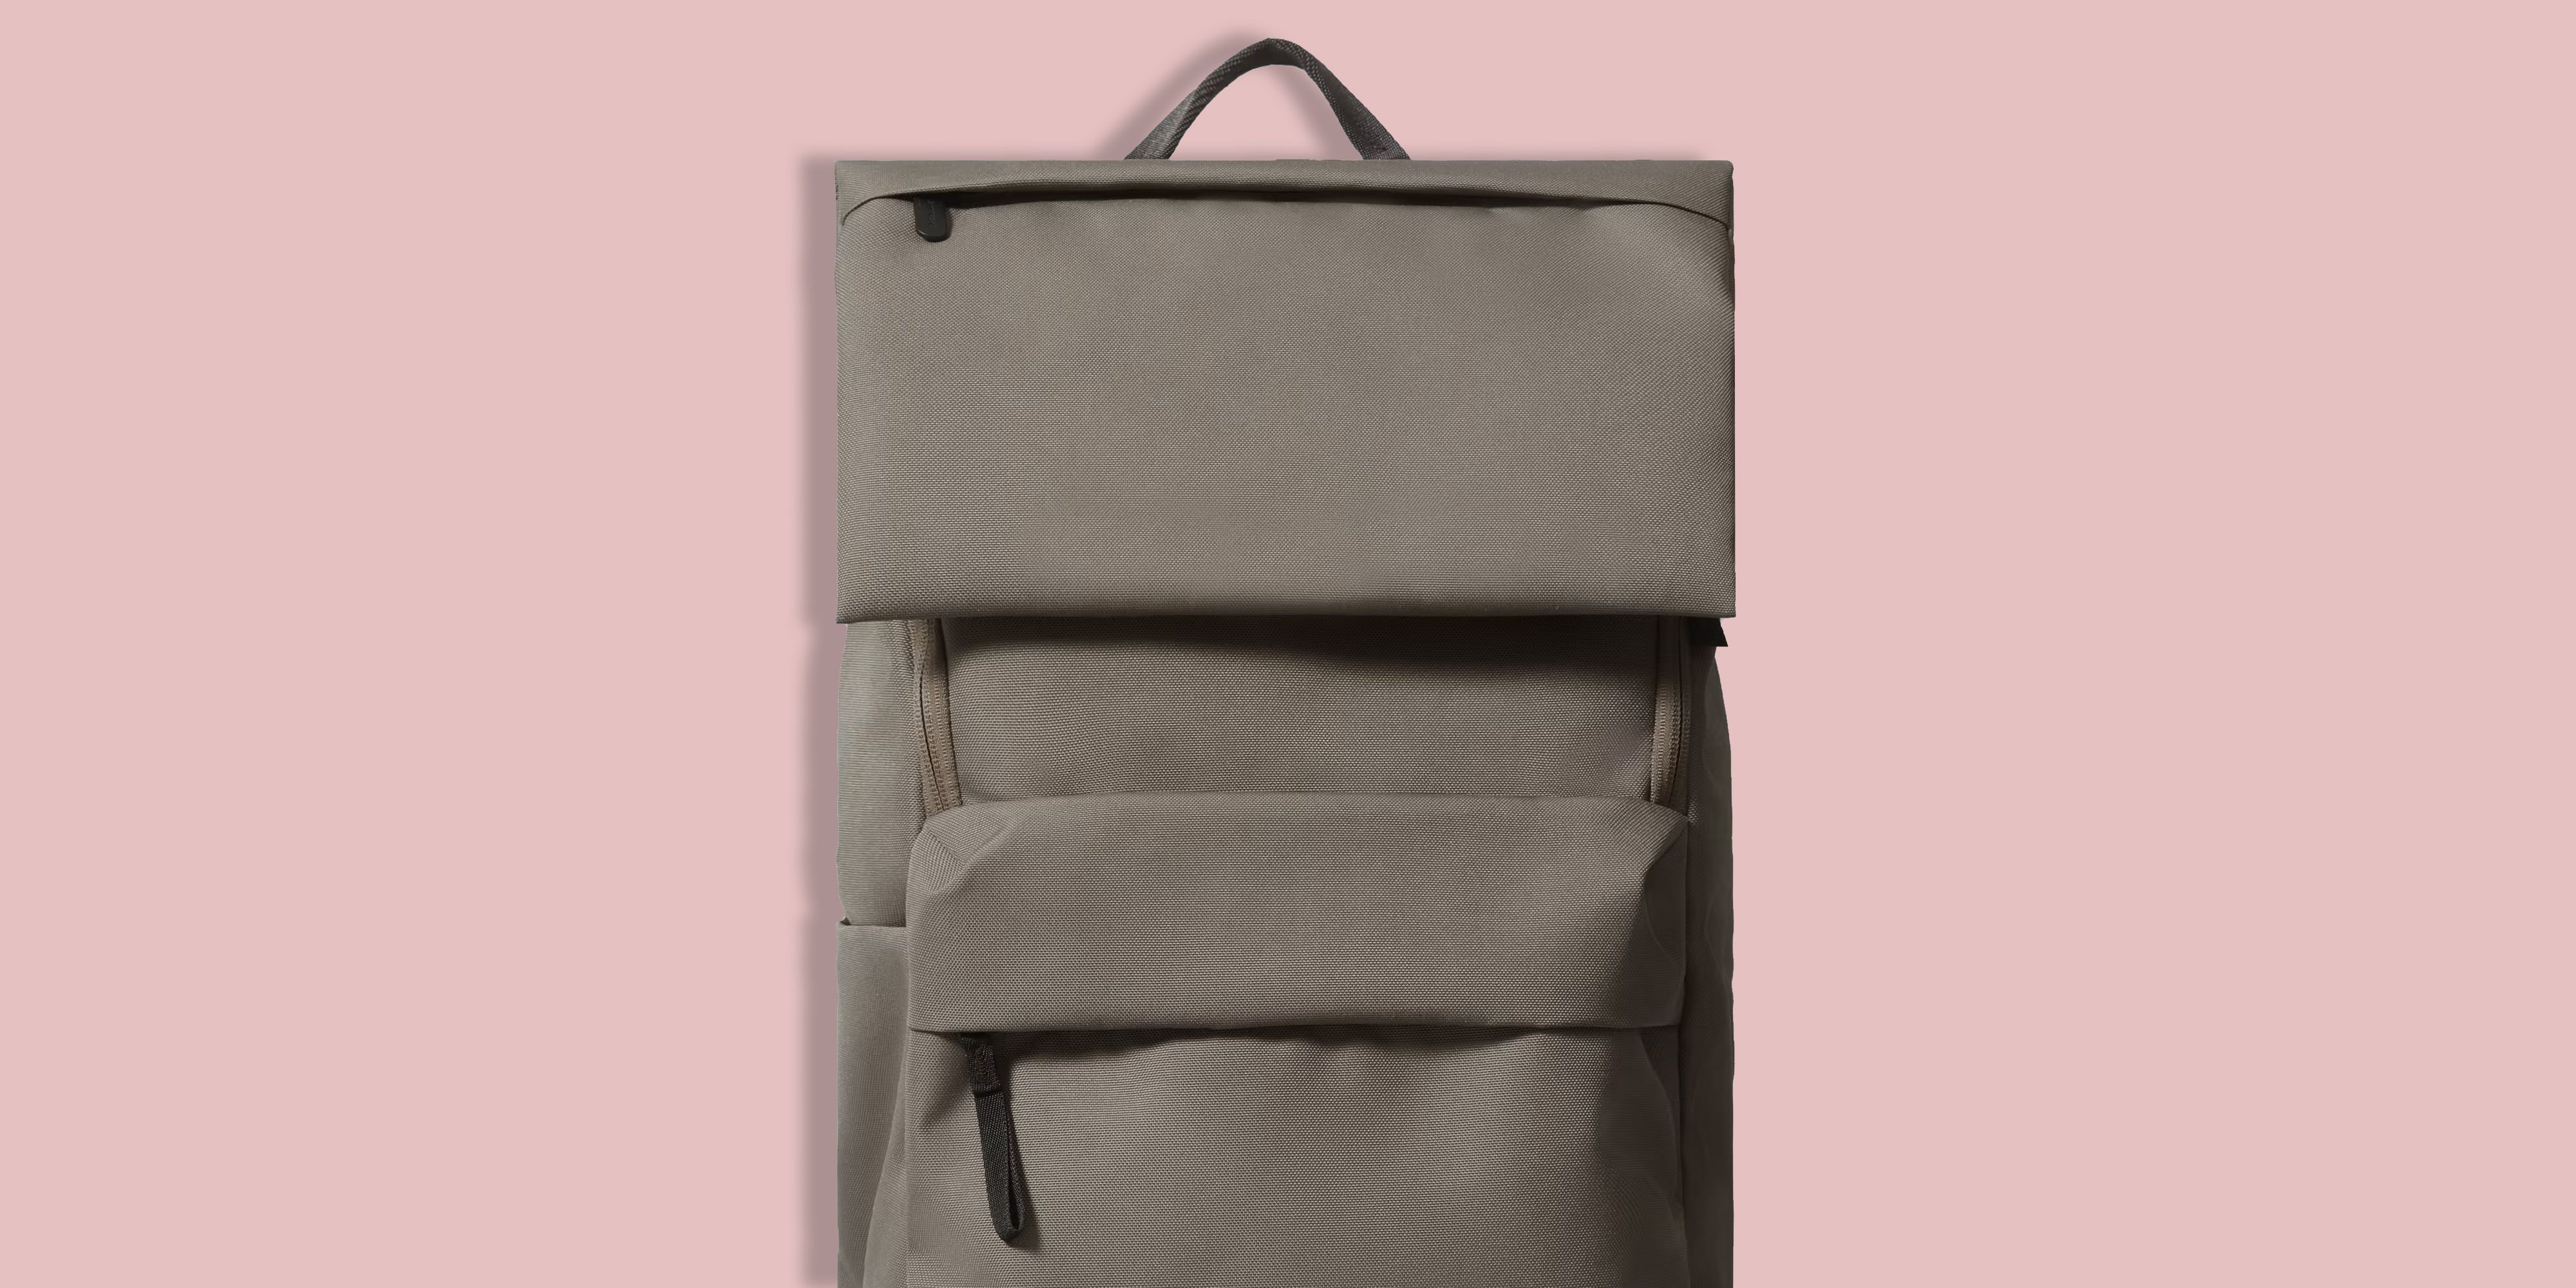 Men's Designer Backpacks for Every Style & Season - Academy by